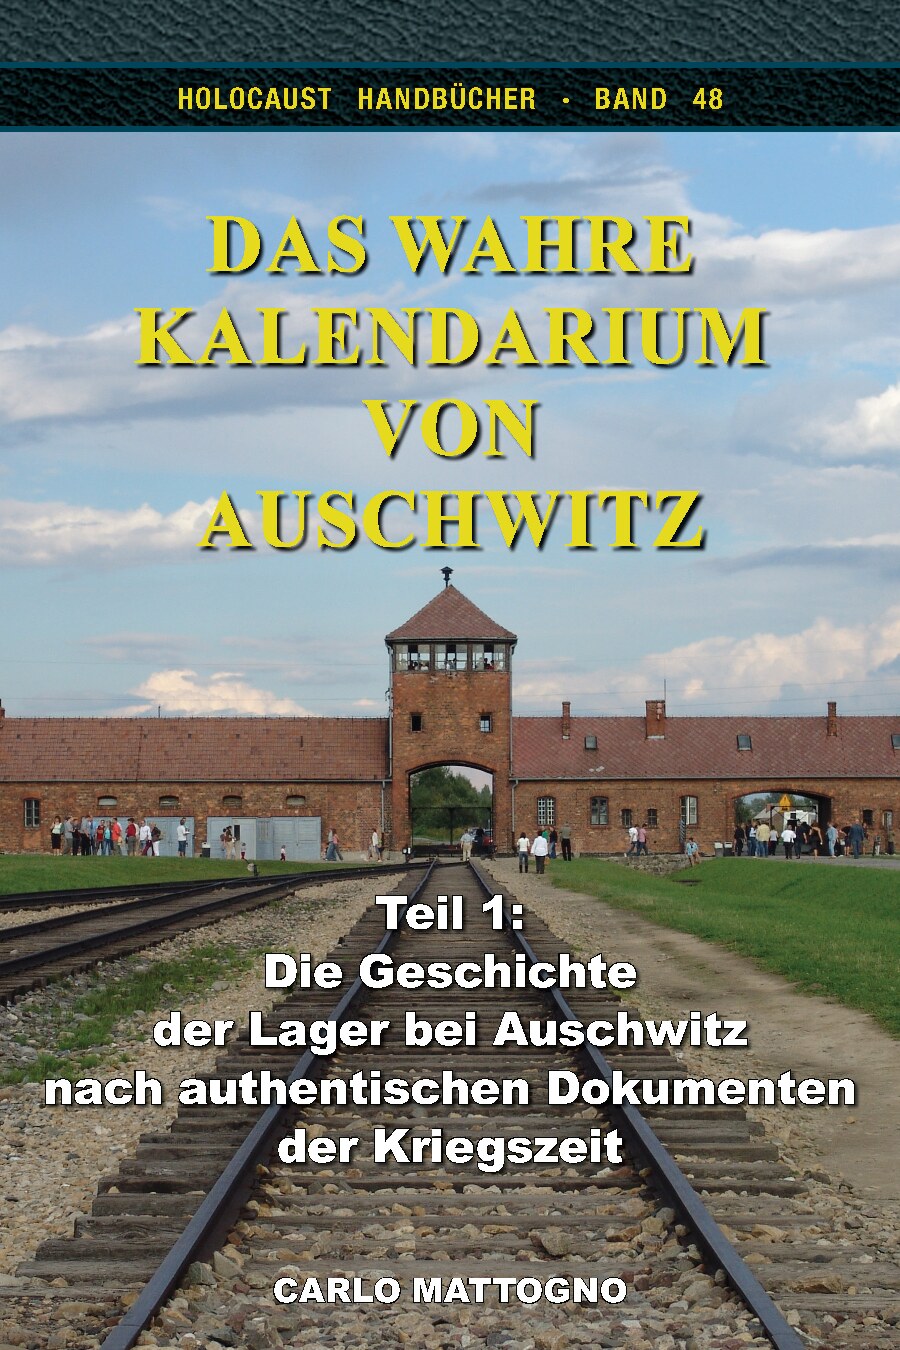 The Real Auschwitz Chronicle: The History of the Auschwitz Camps